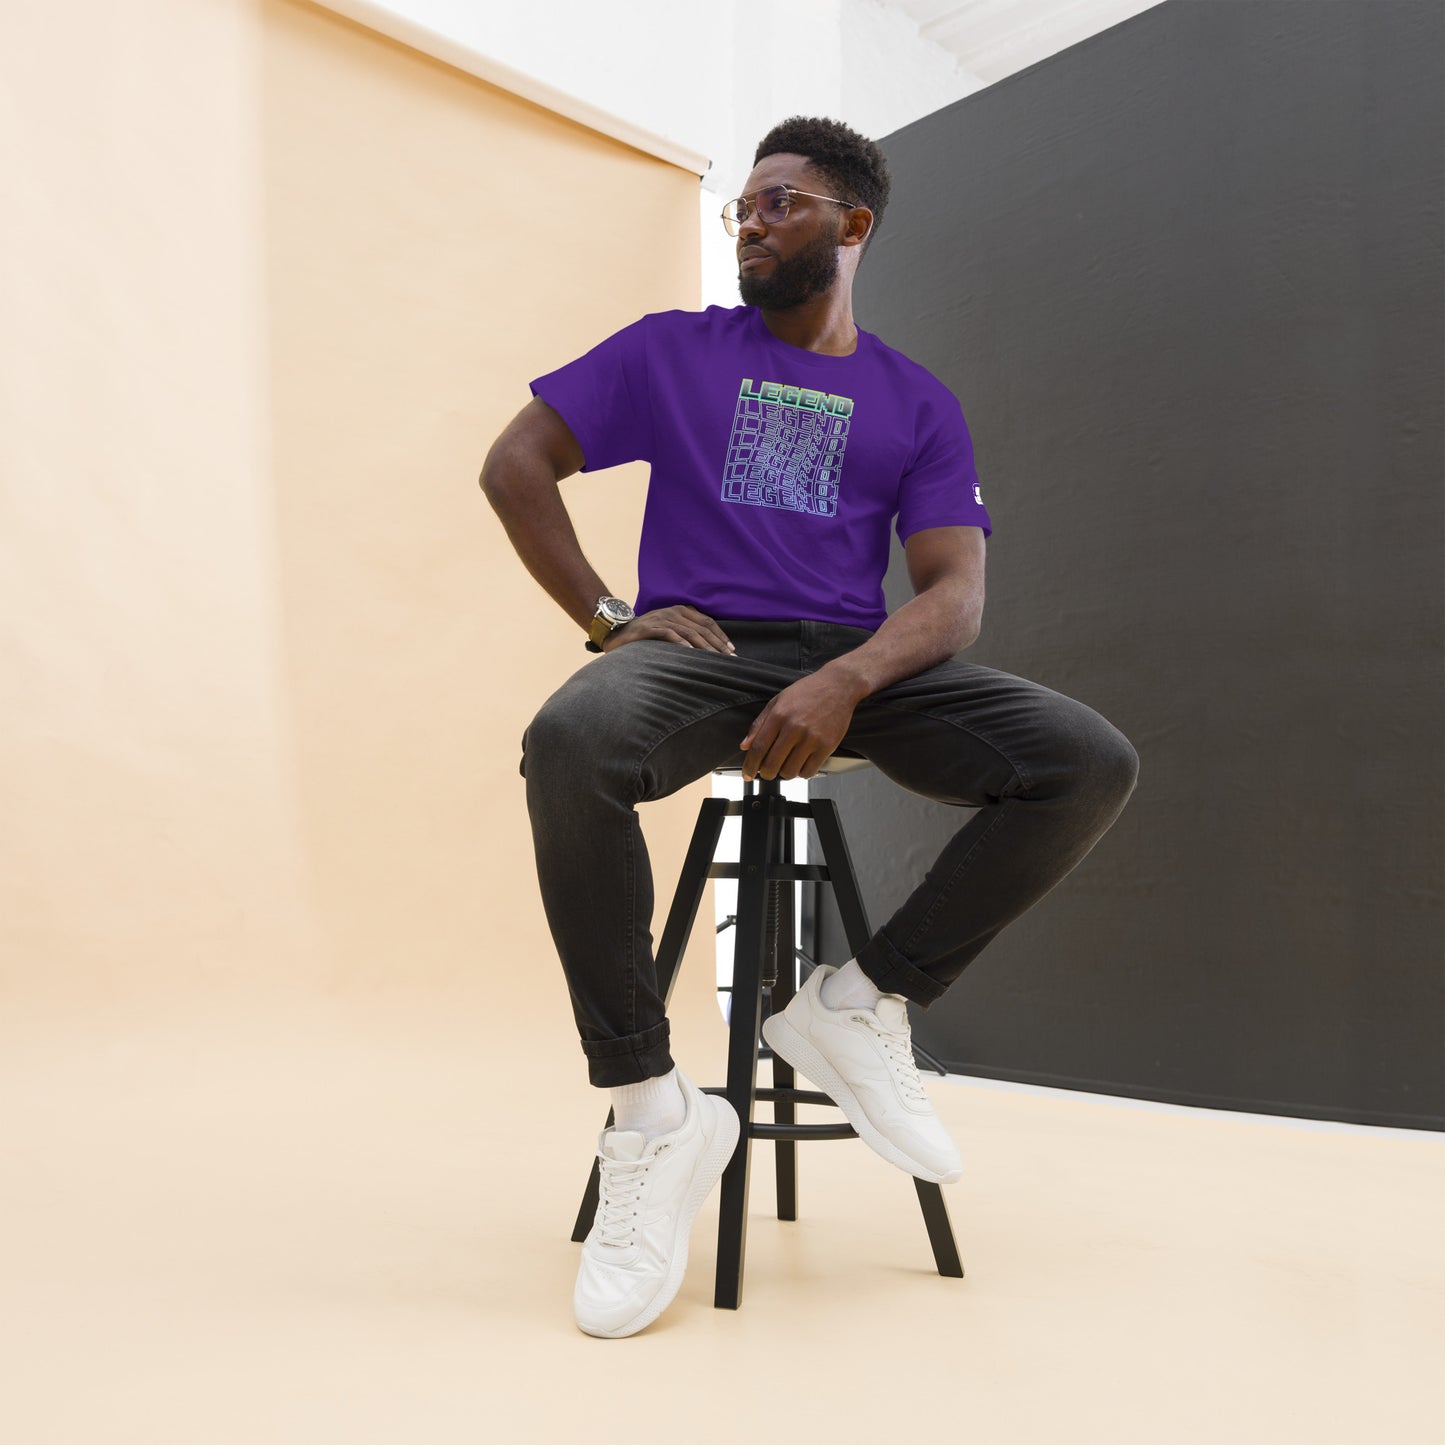 Stylish man seated on a high stool, looking away thoughtfully, wearing a purple t-shirt with a cube-shaped 'LEGEND' graphic in a green-to-light blue gradient, completed with dark jeans, white sneakers, and a wristwatch, against a two-tone peach and black background.